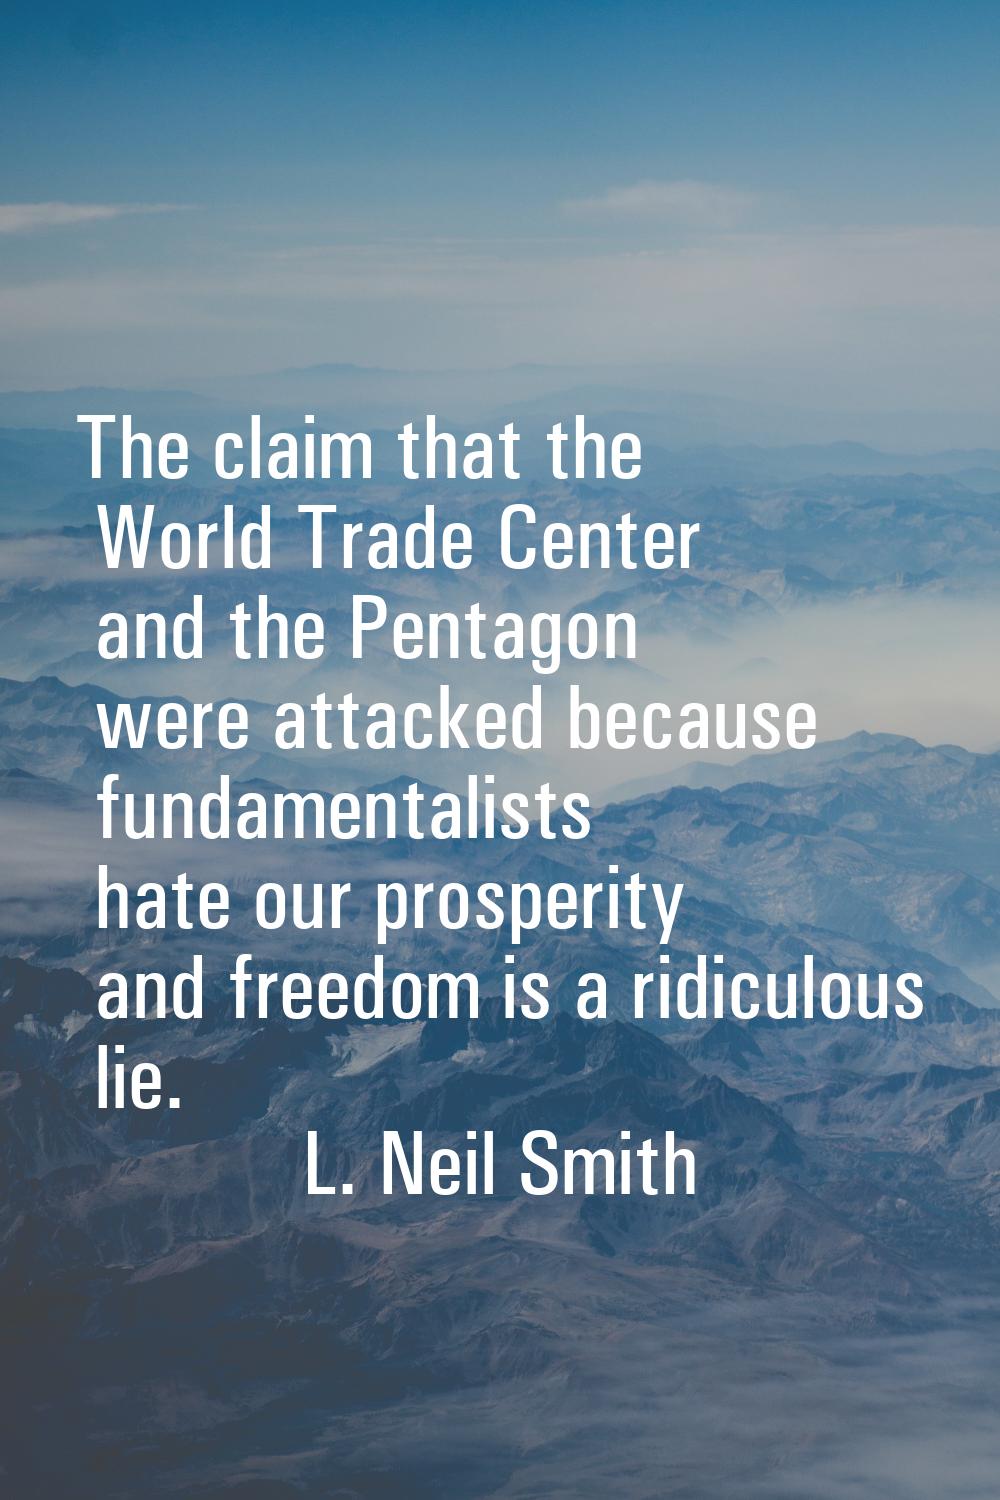 The claim that the World Trade Center and the Pentagon were attacked because fundamentalists hate o